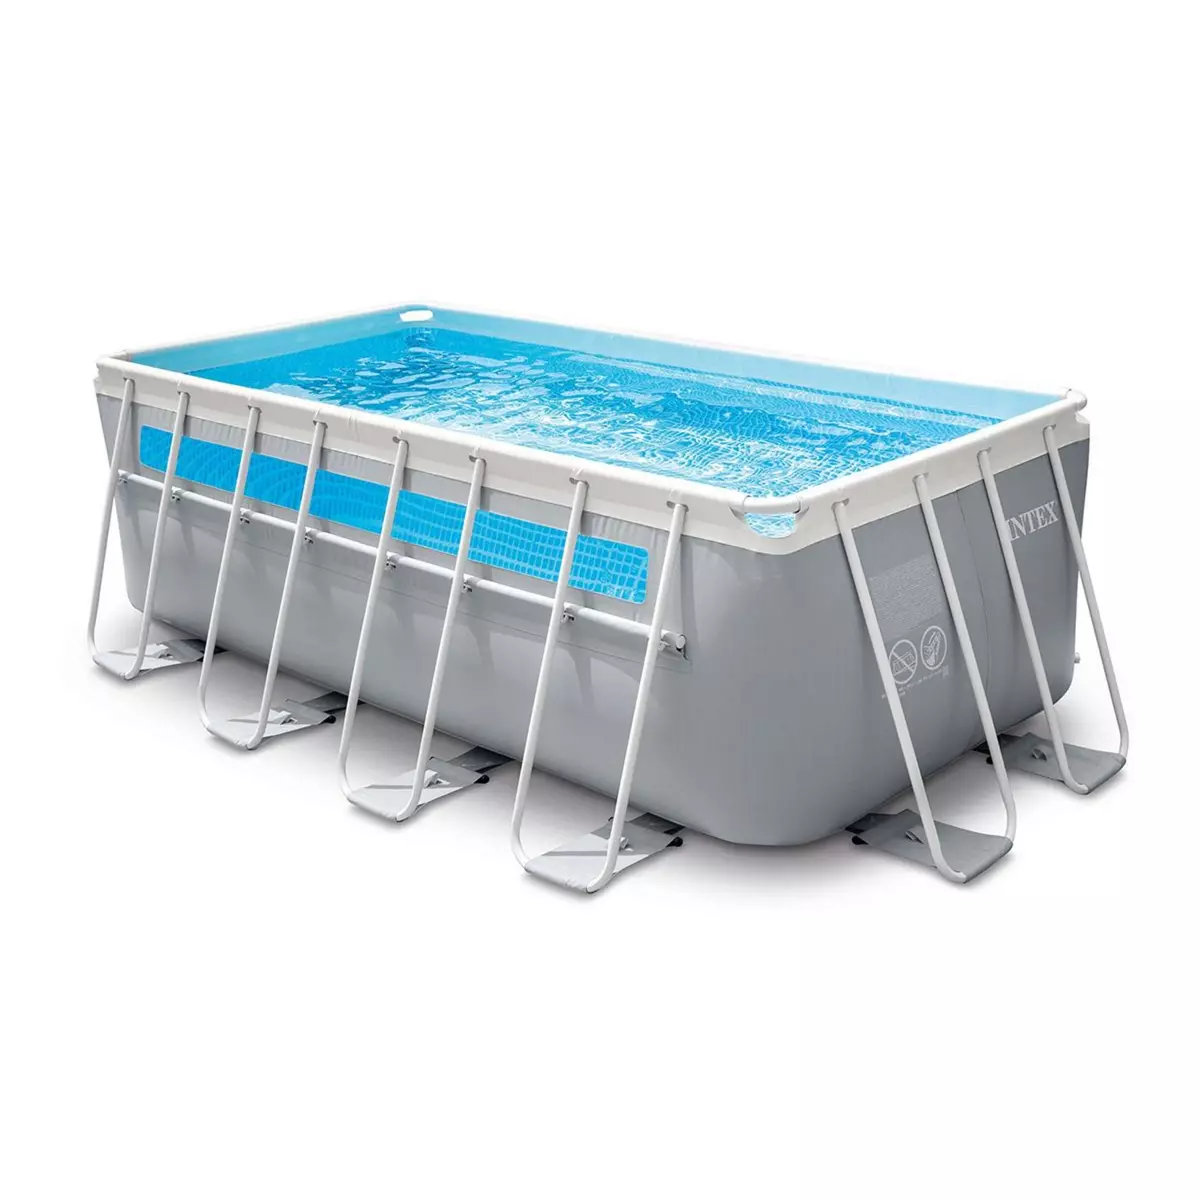 INTEX Piscine tubulaire Prism Frame Clearview rectangulaire 4,00 x 2,00 x 1,22 m - Intex